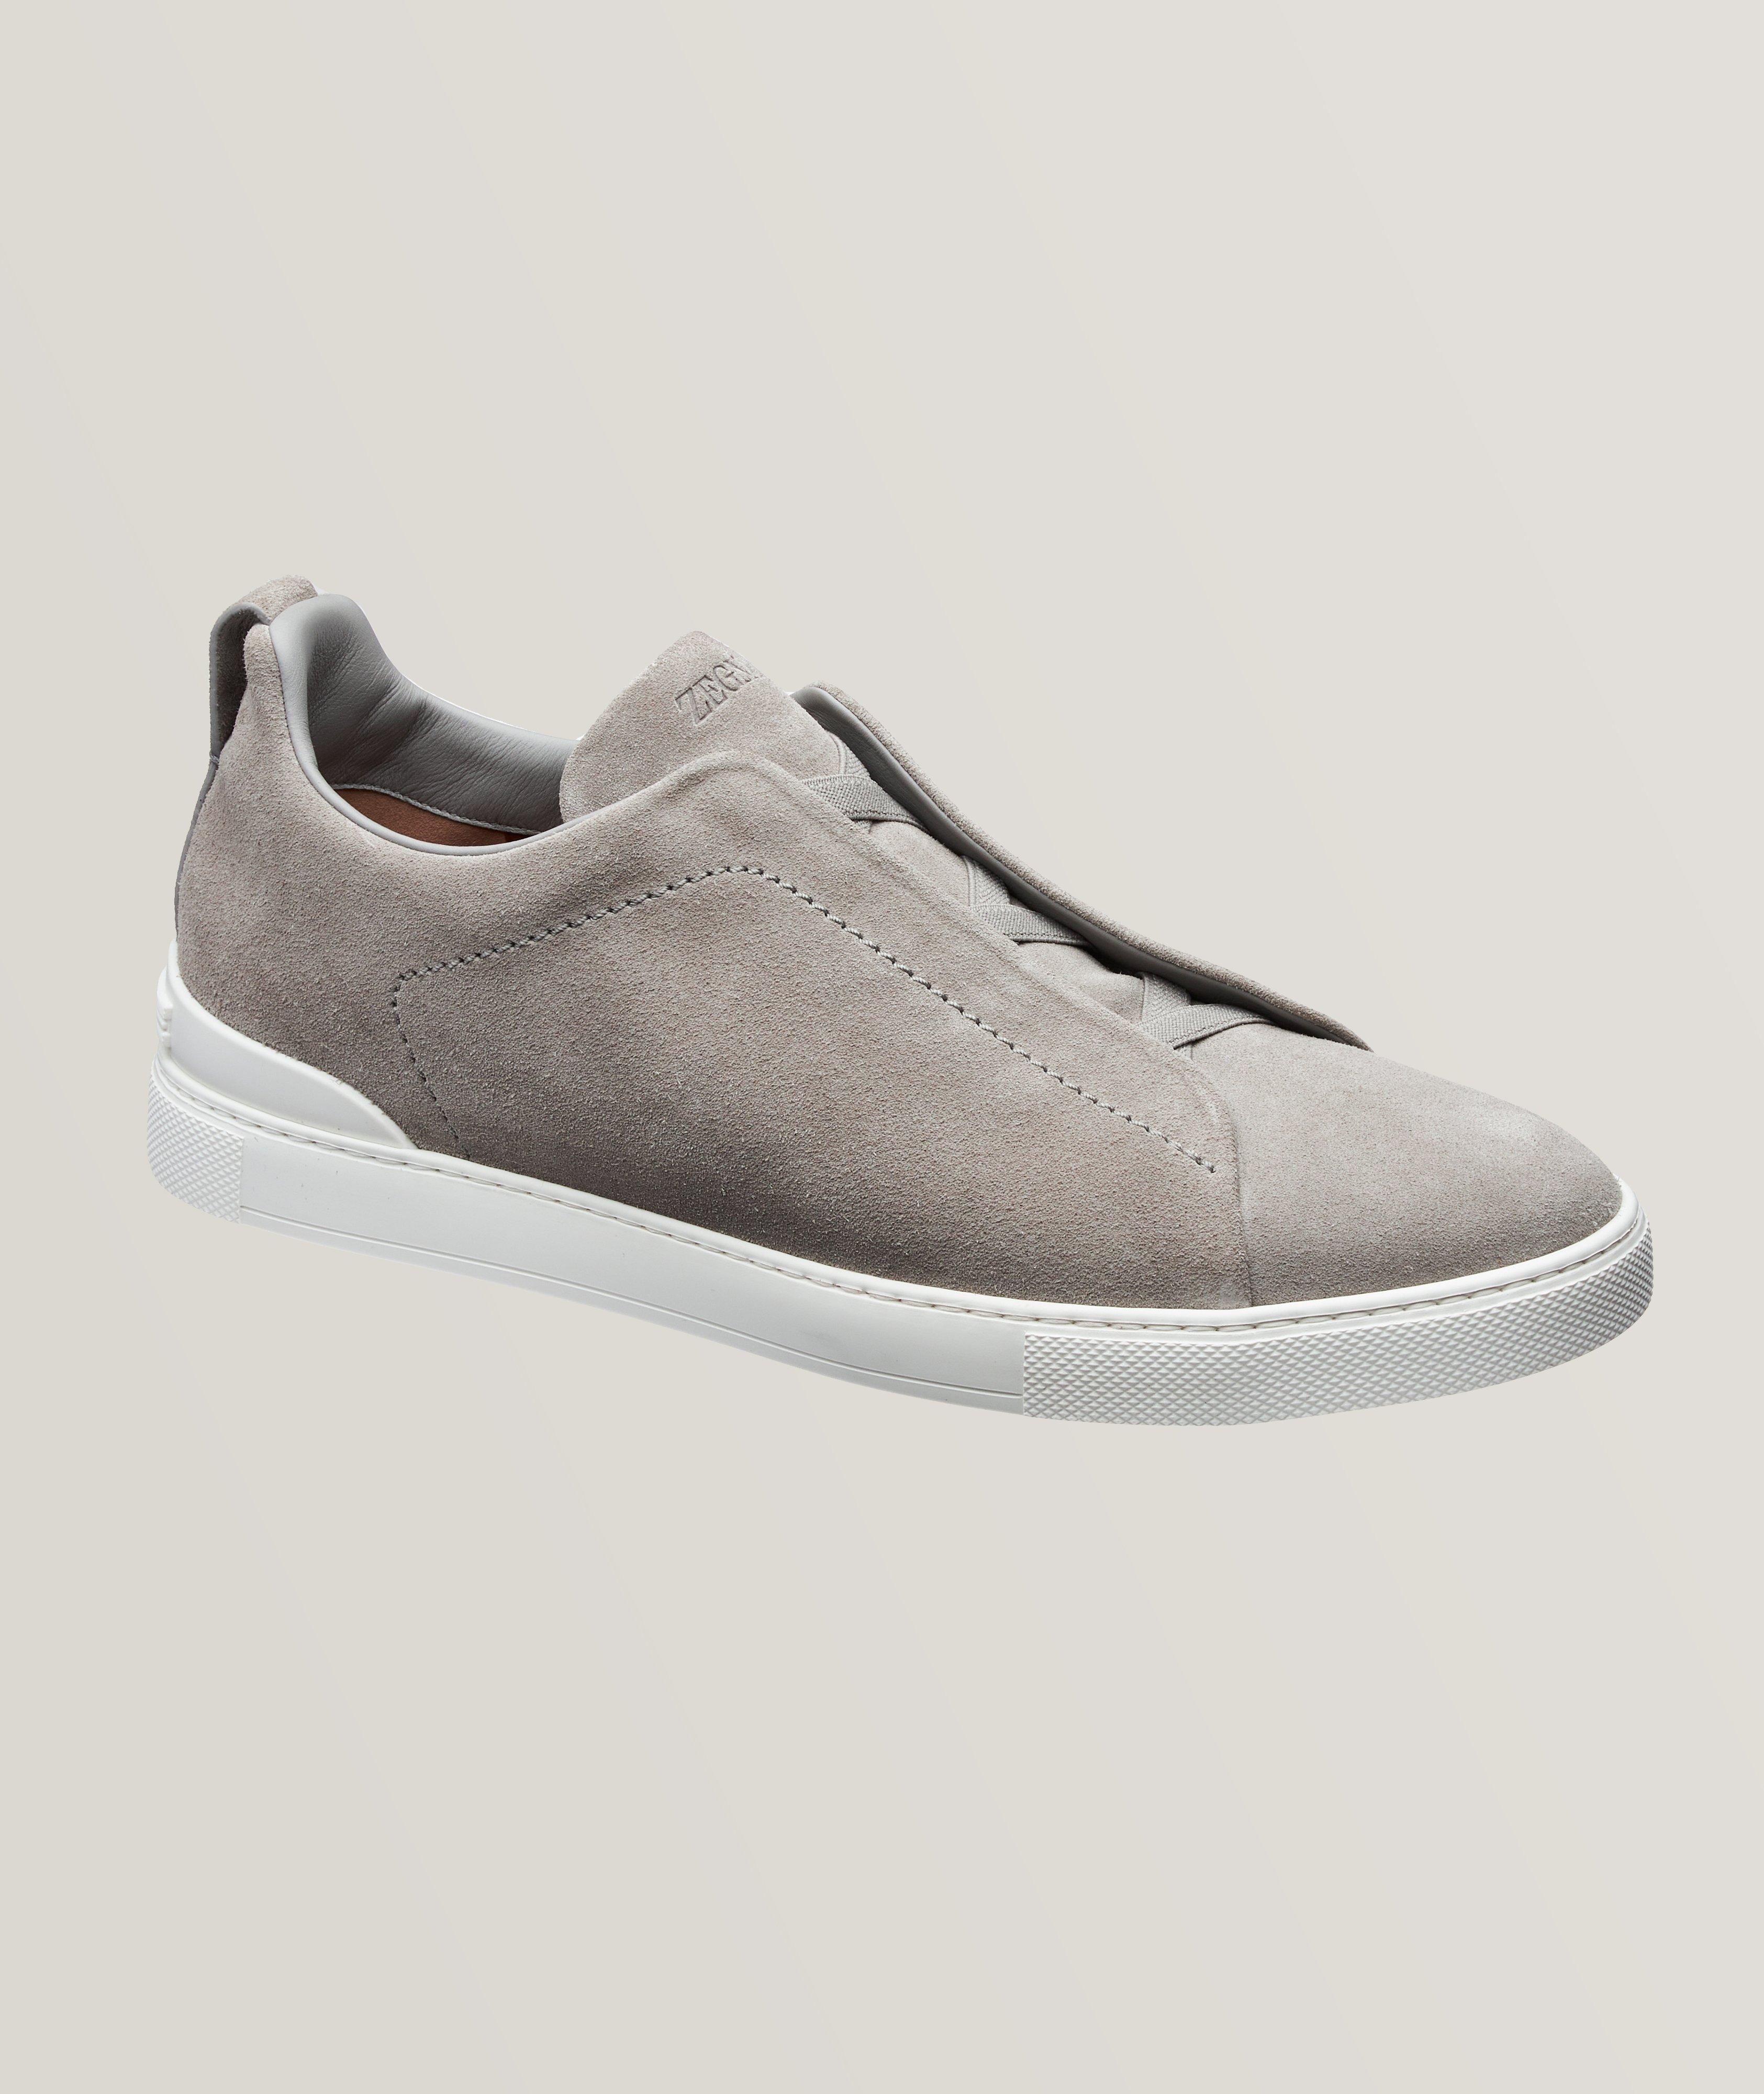 Triple Stitch Suede Slip-On Sneakers image 0